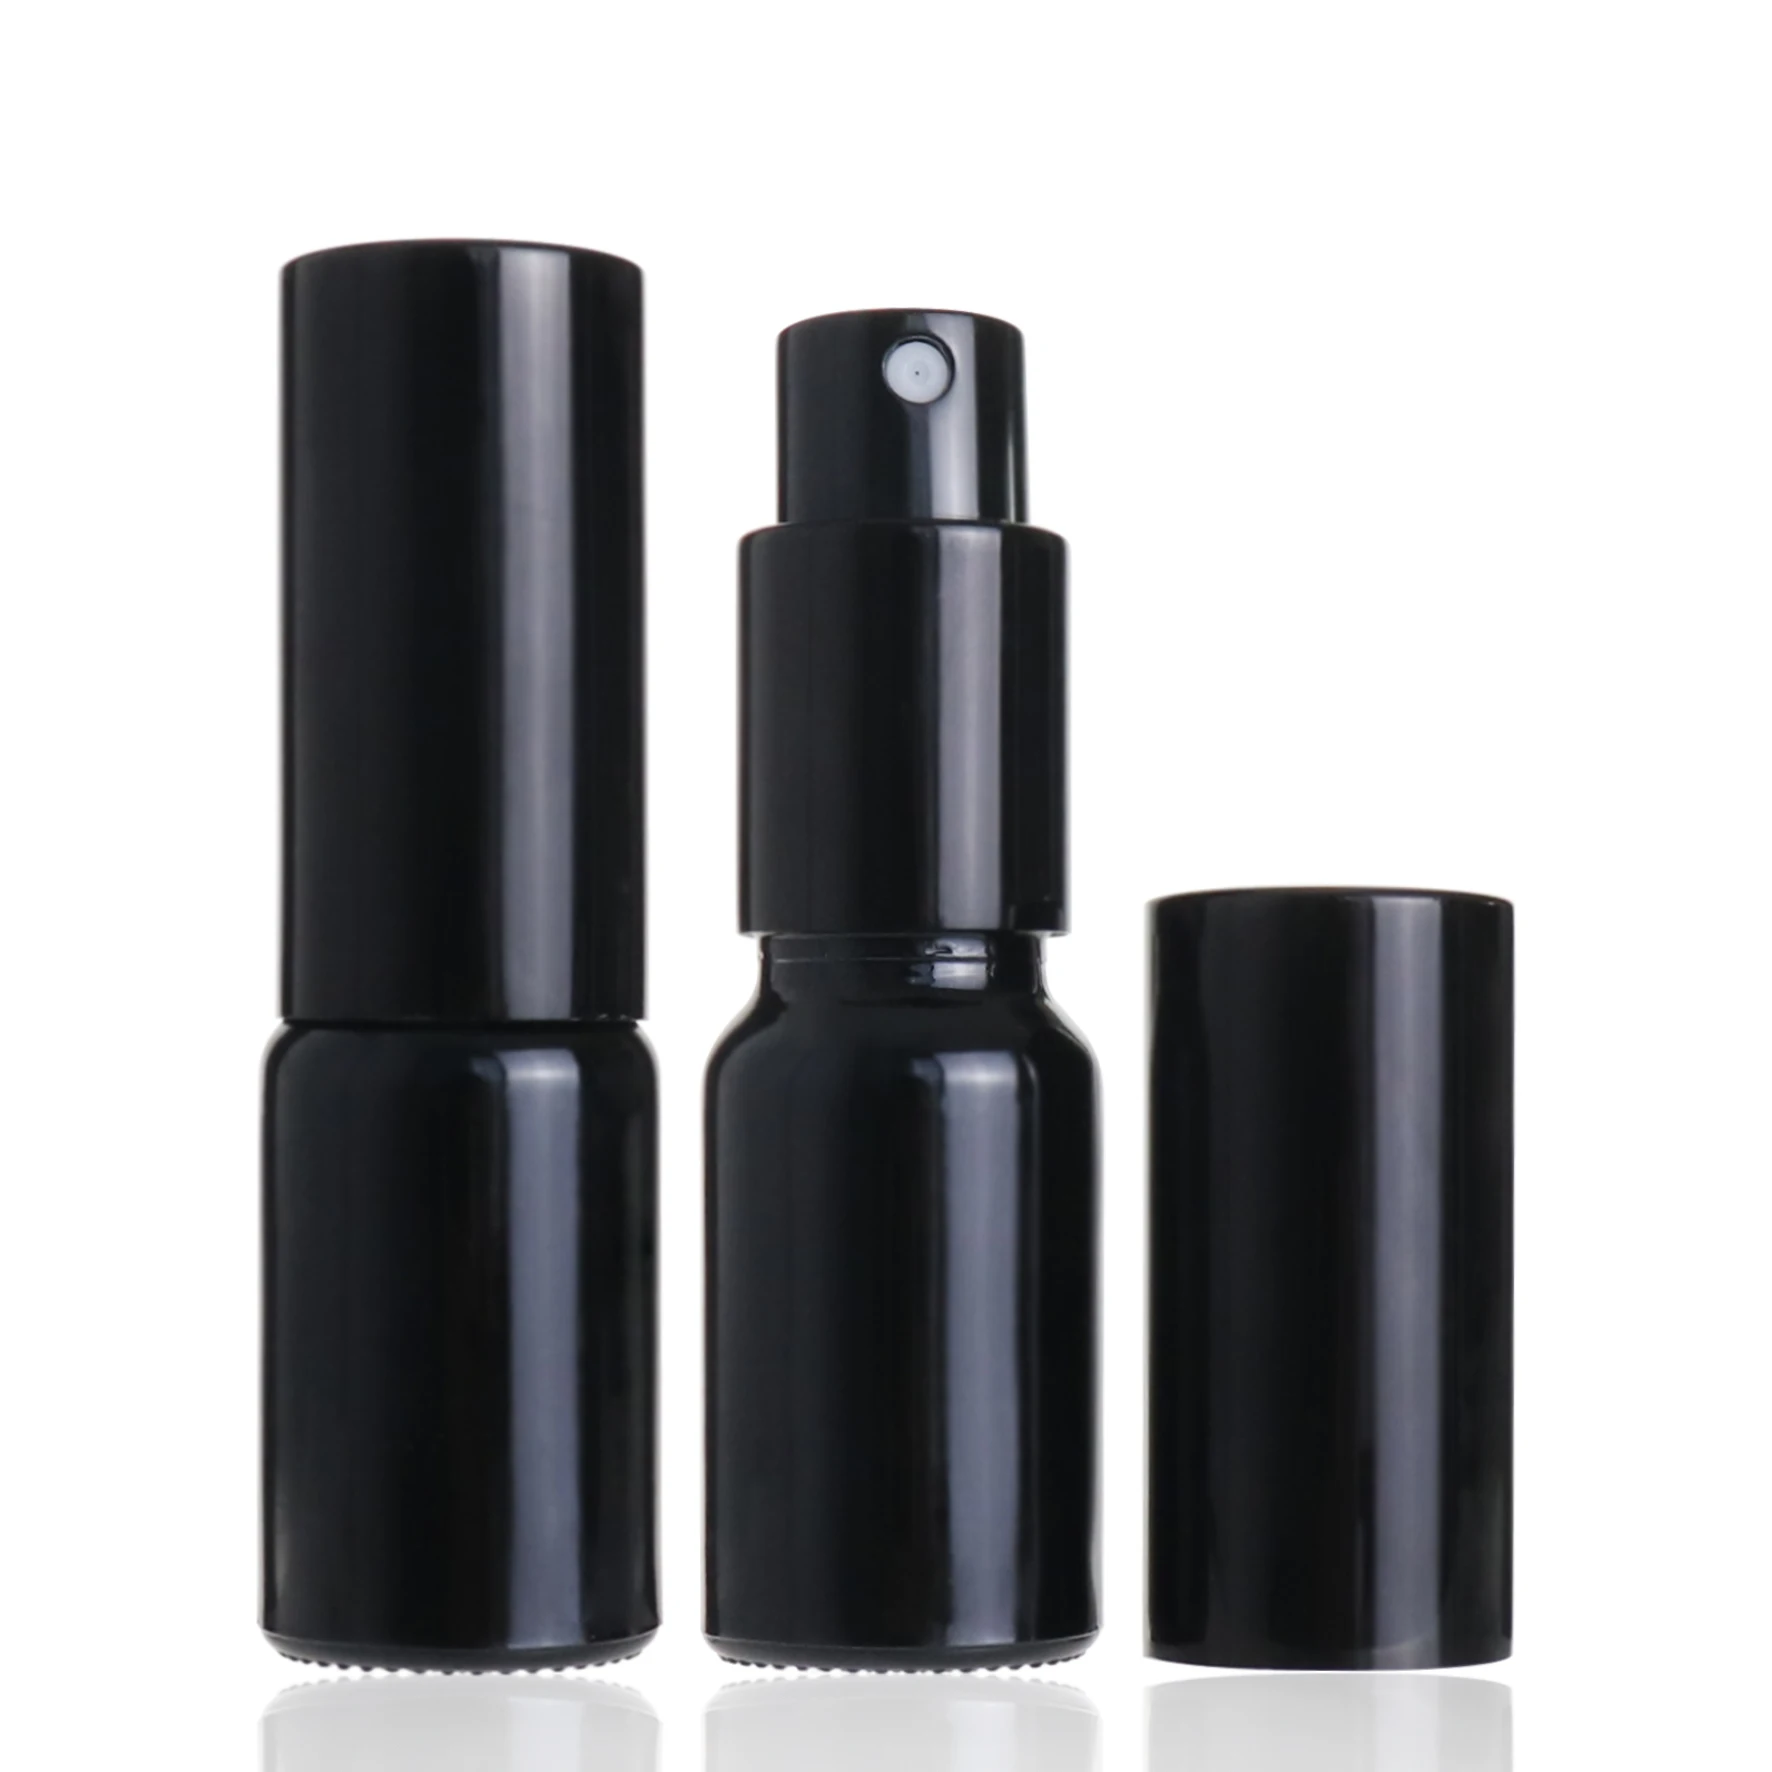 Download Cosmetic Round Glossy Black 10ml Glass Perfume Spray Bottle With Aluminum Pump Cap Buy Spray Bottle Black Black Aluminium Spray Bottle Black Pump Bottle Product On Alibaba Com